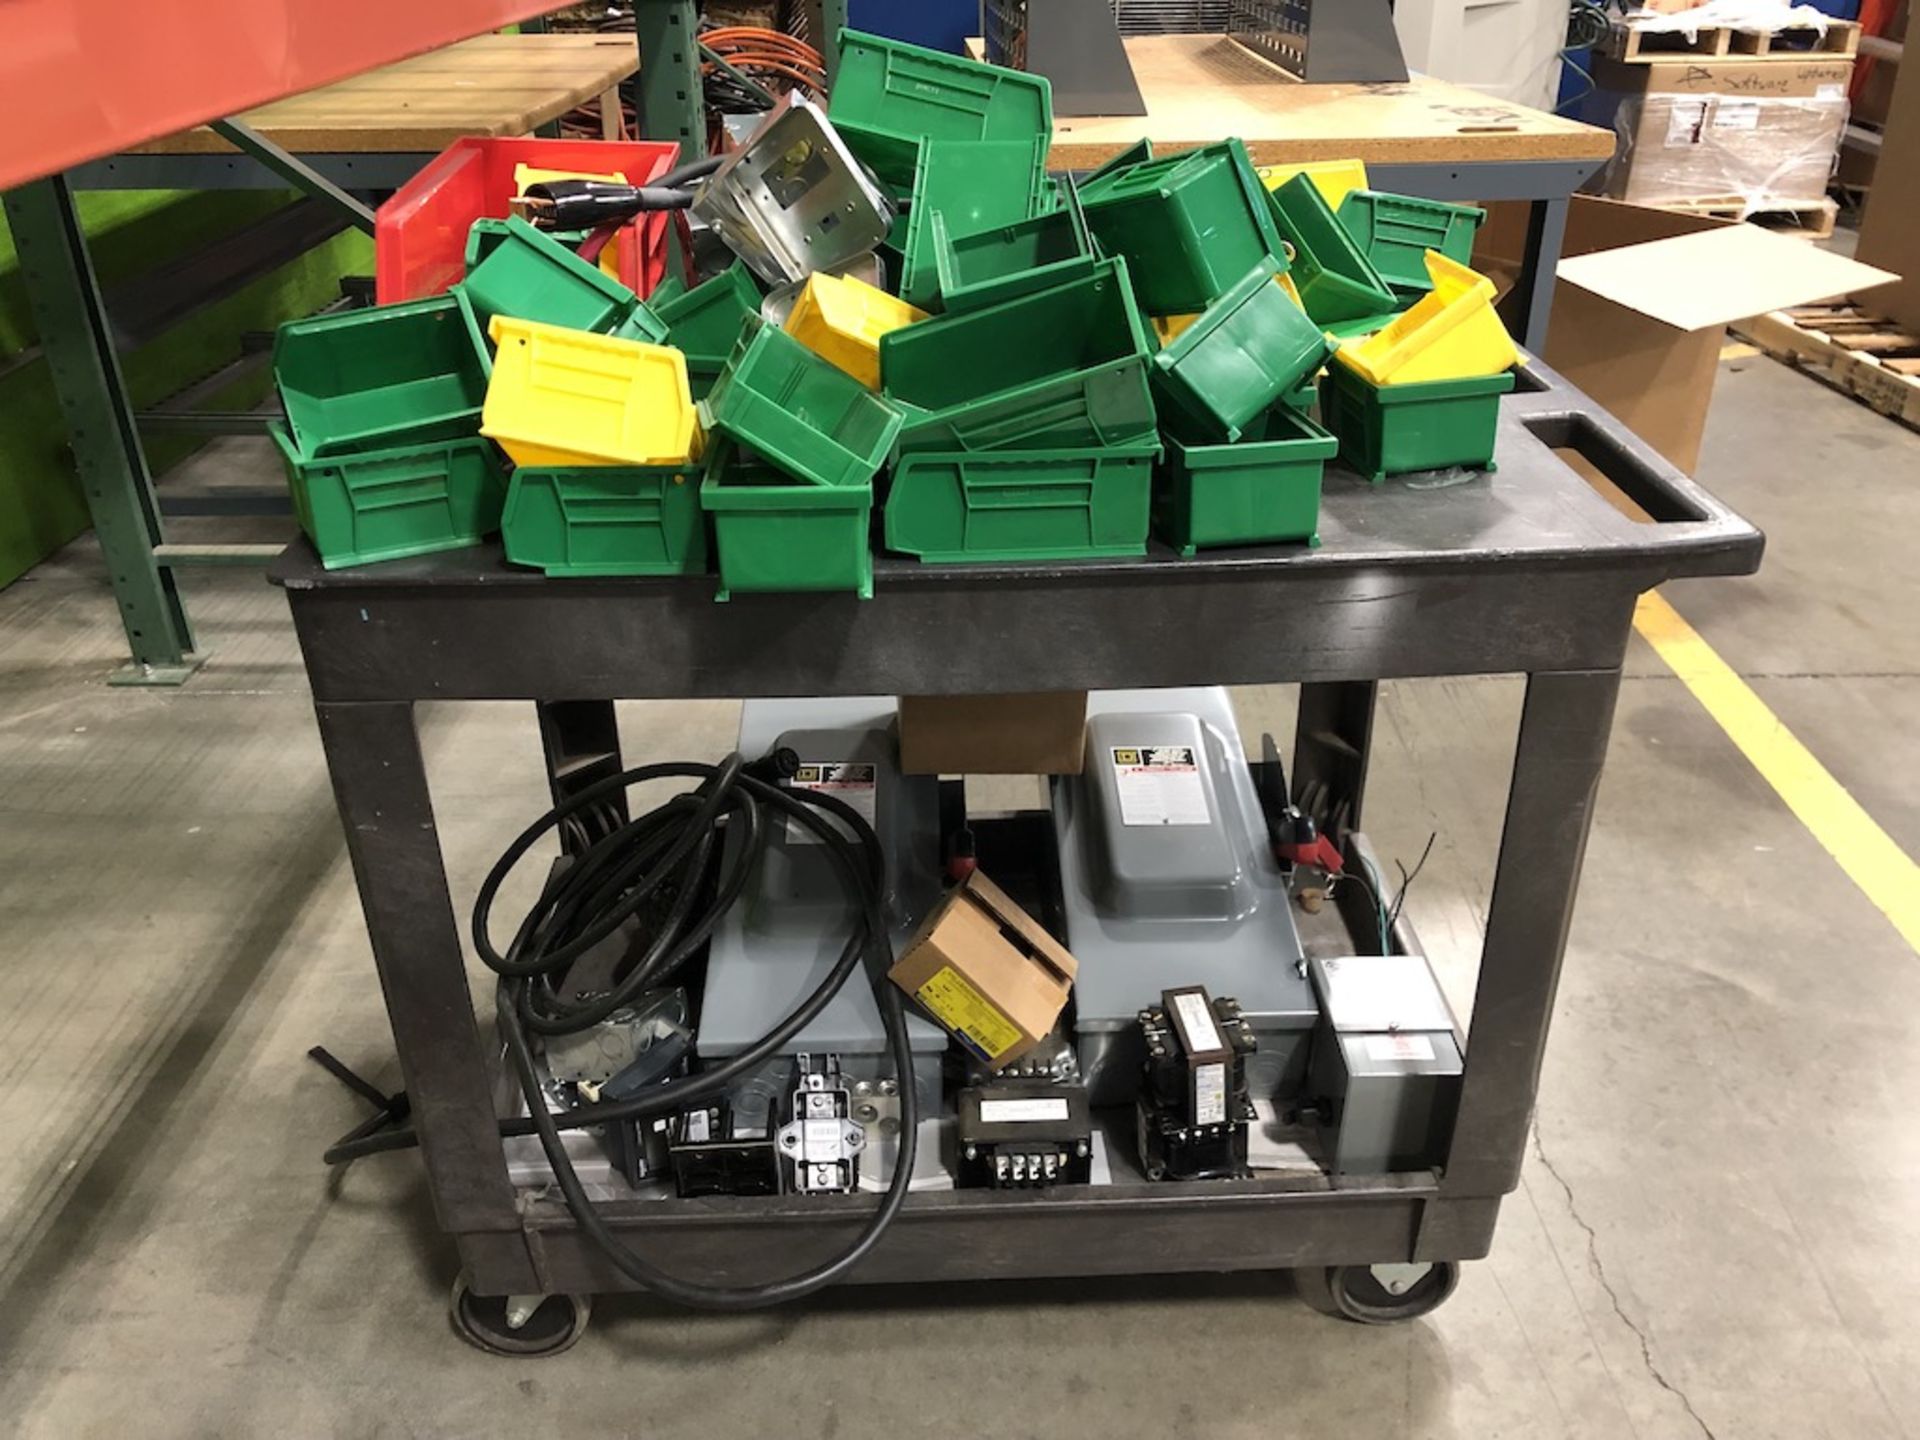 PLASTIC CART ( CONTNETS NOT INCLUDED ) 40IN L X 25 1/4IN W X 32IN H   SCHNEIDER ELECTRIC- 6611 - Image 4 of 4